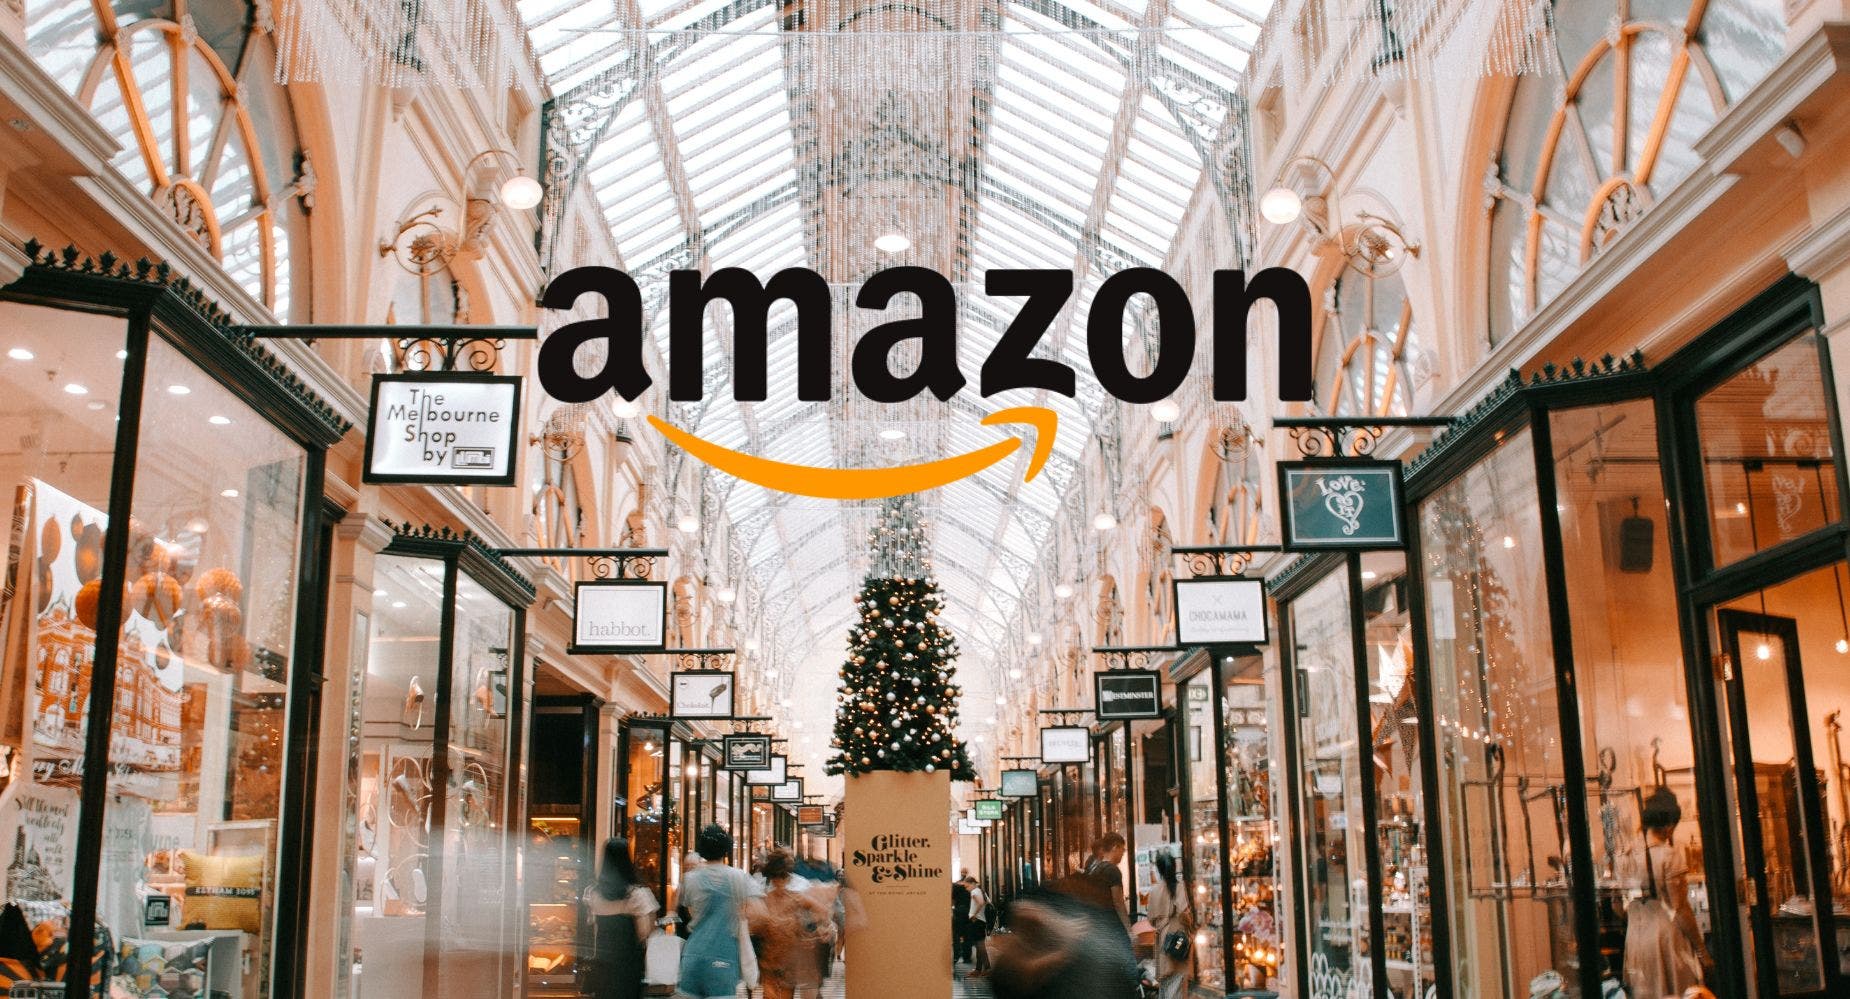 Amazon Records 'Biggest Holiday Shopping Weekend Ever': Here Are The Hottest Selling Items